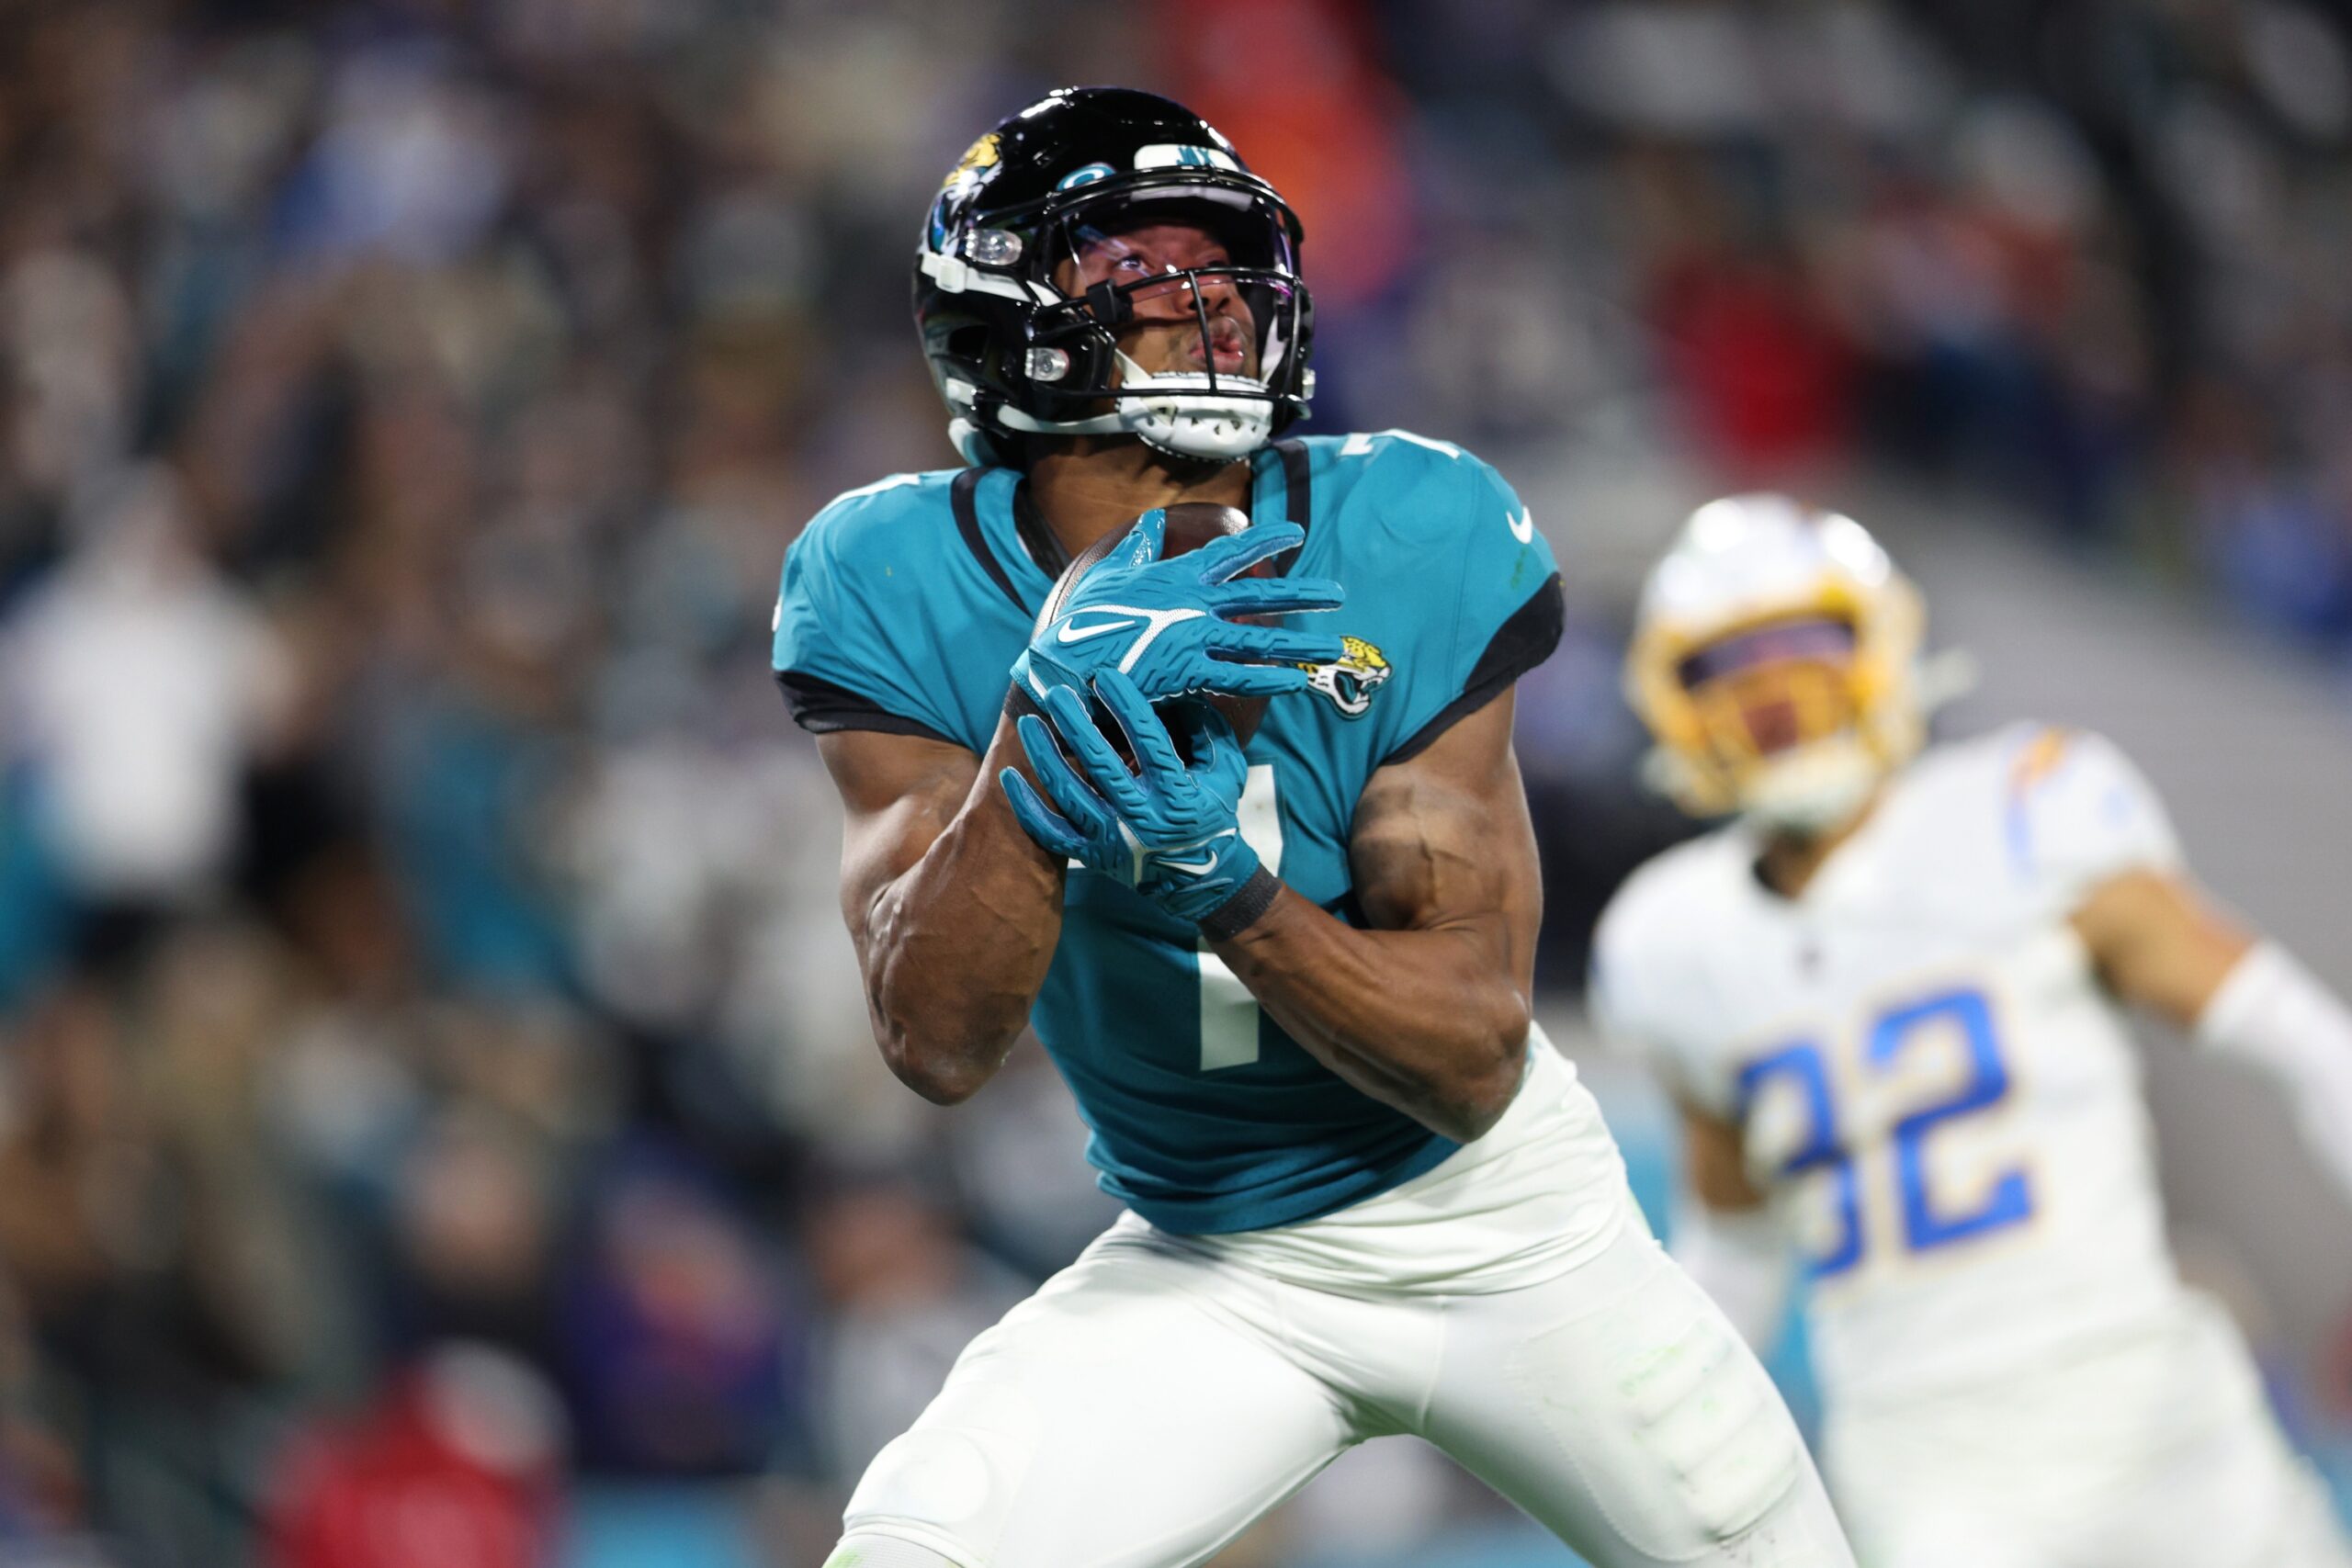 Zay Jones Injury Update: What We Know About the Jacksonville Jaguars WR